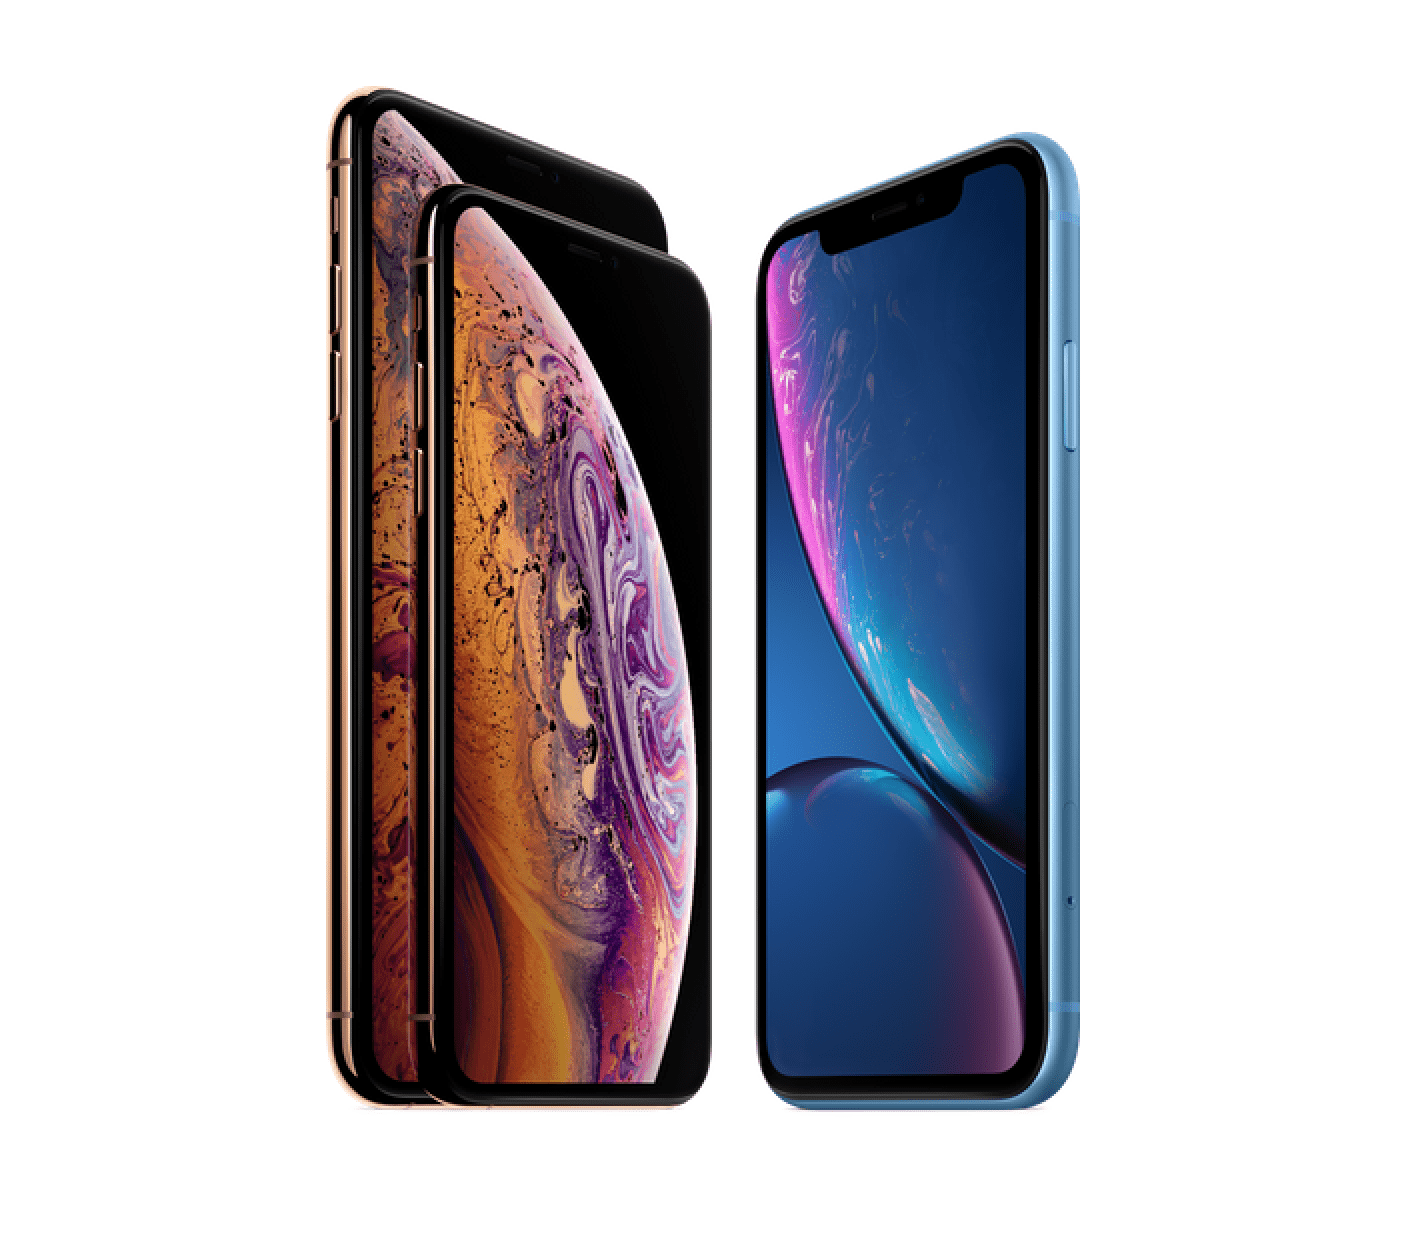 Bring an iPhone 11 Pro, 11 or 11R to US Mobile to get up to $400 off!
